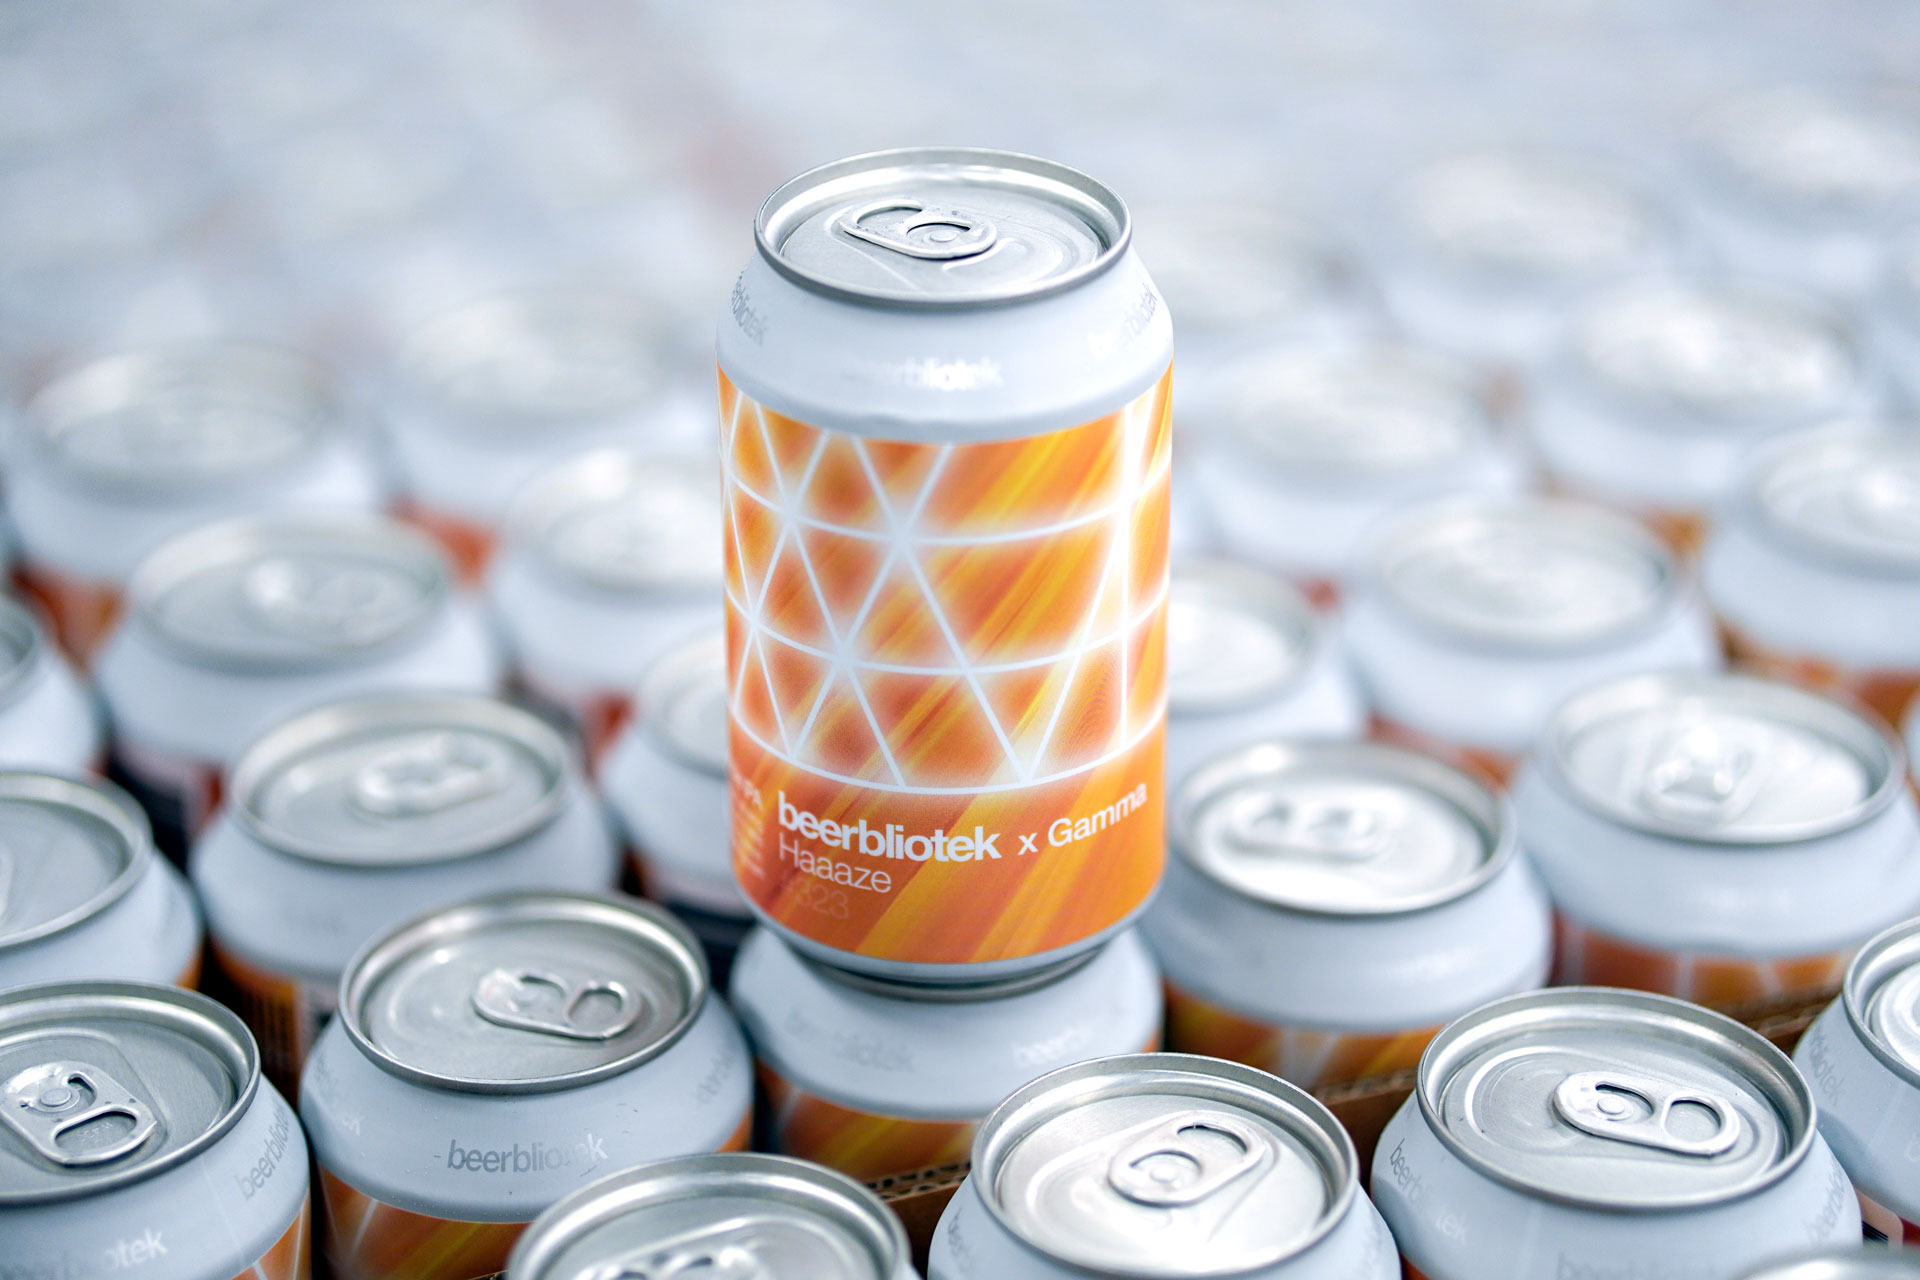 A can on packaging day of Haaaze, a Hazy Double IPA. This is a collaboration, brewed in Gothenburg, by Swedish Craft Brewery Beerbliotek, and Danish brewery, Gamma.